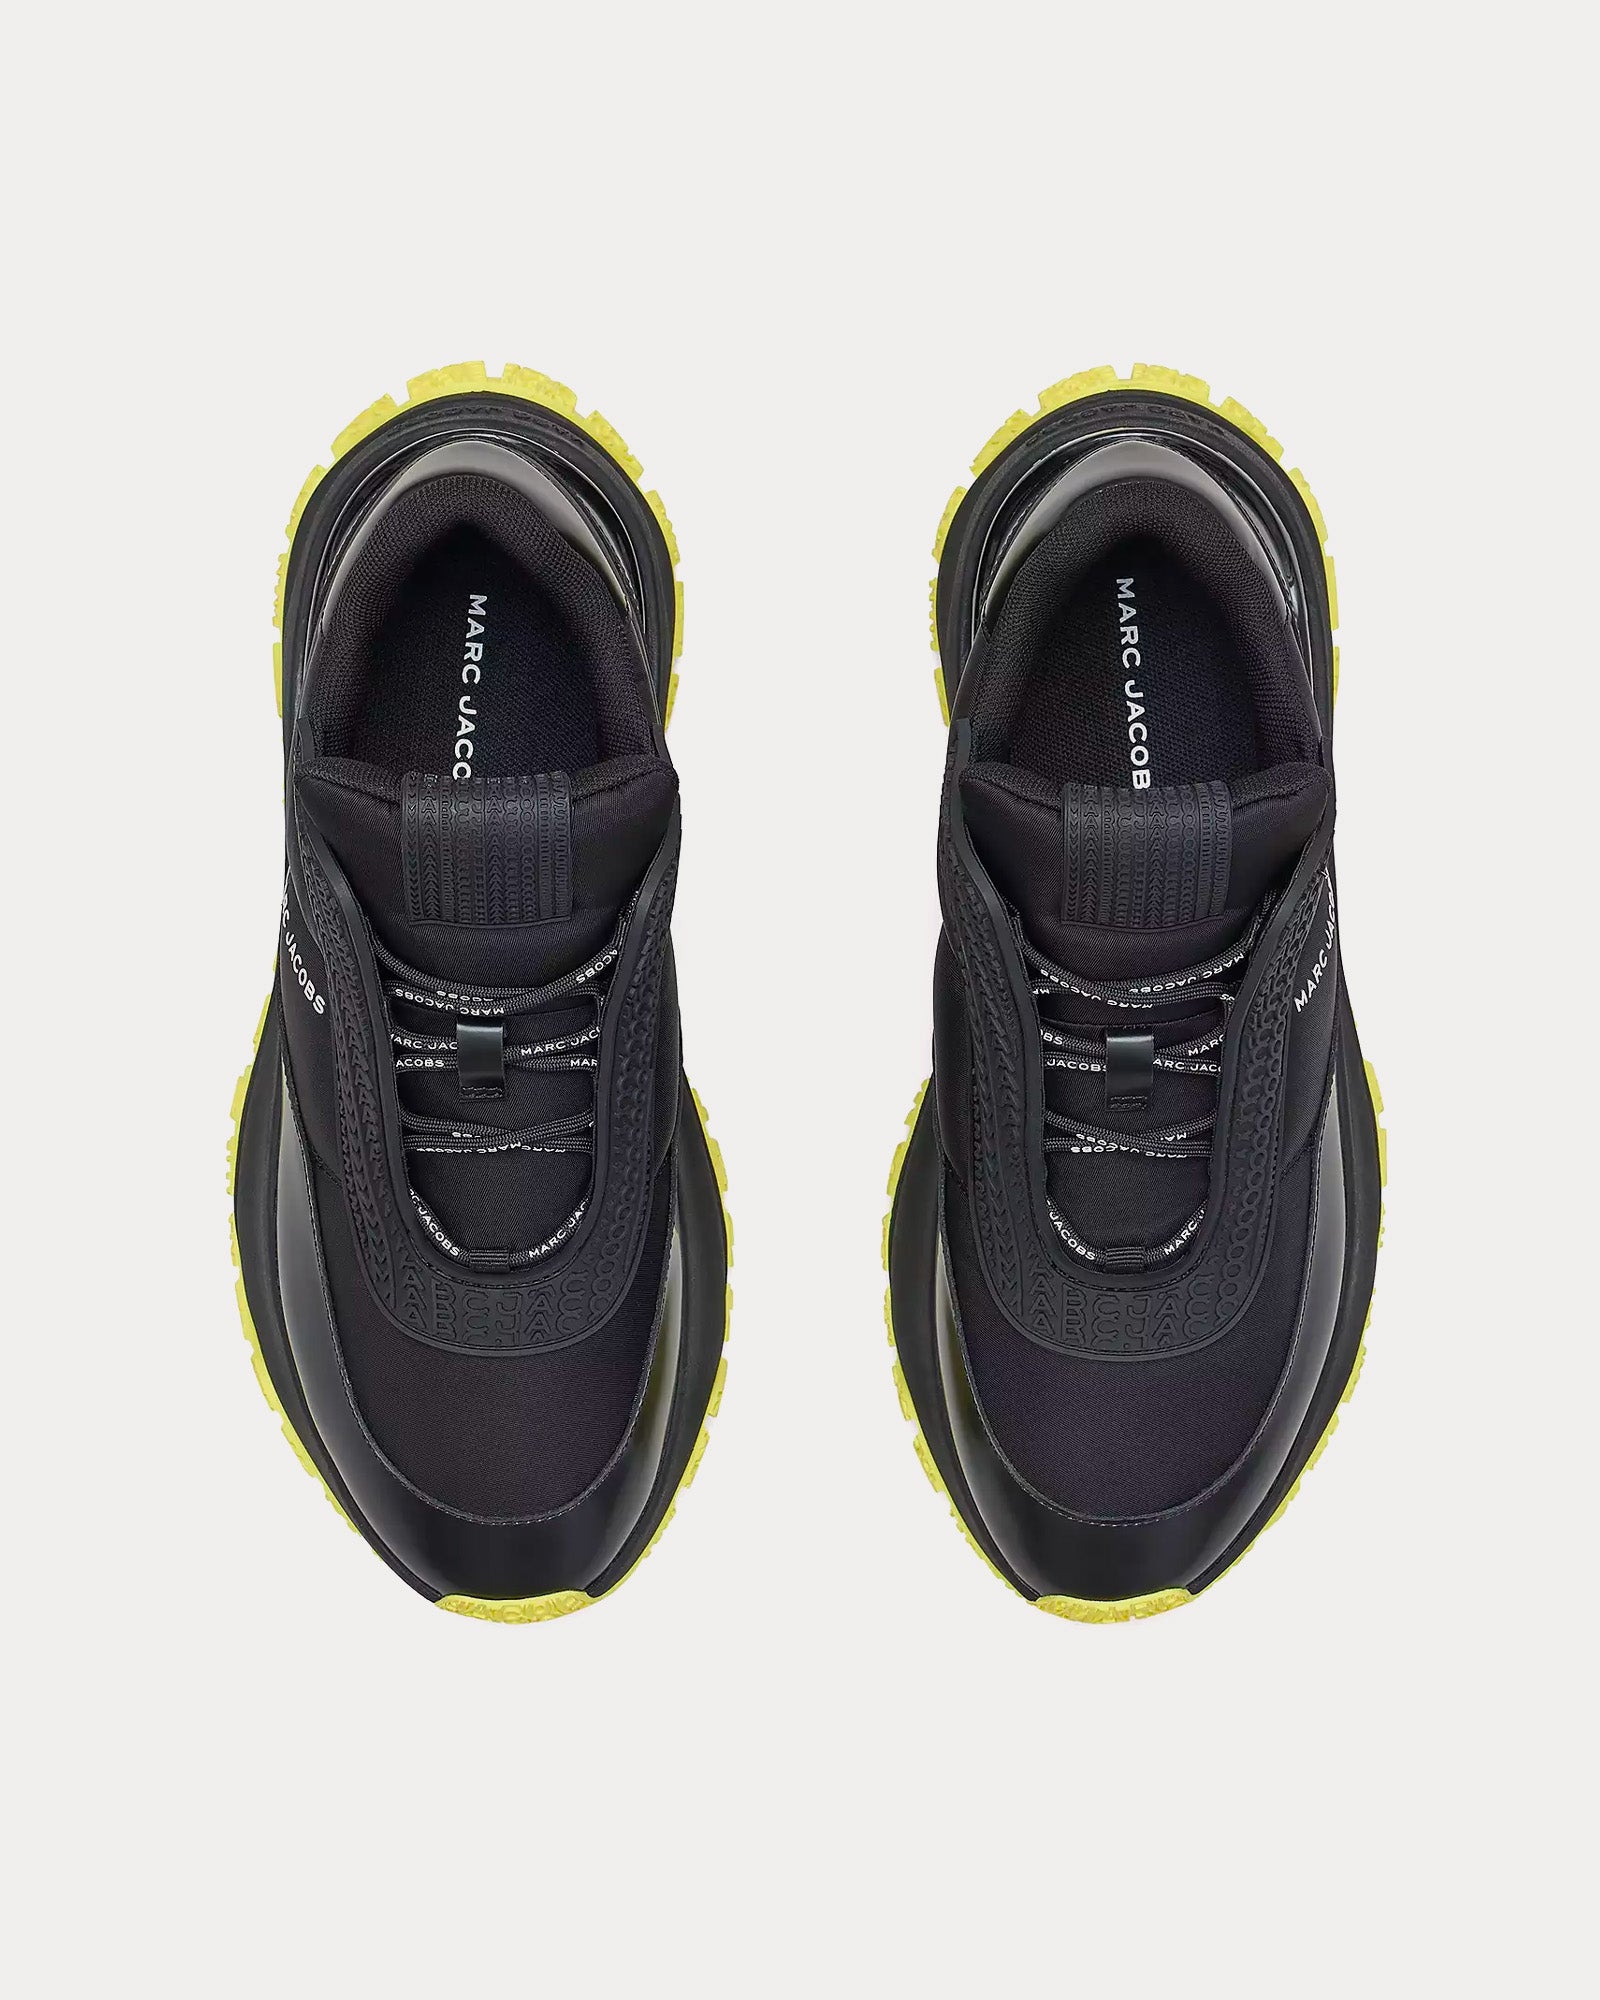 Marc Jacobs - The Lazy Runner Black / Yellow Low Top Sneakers